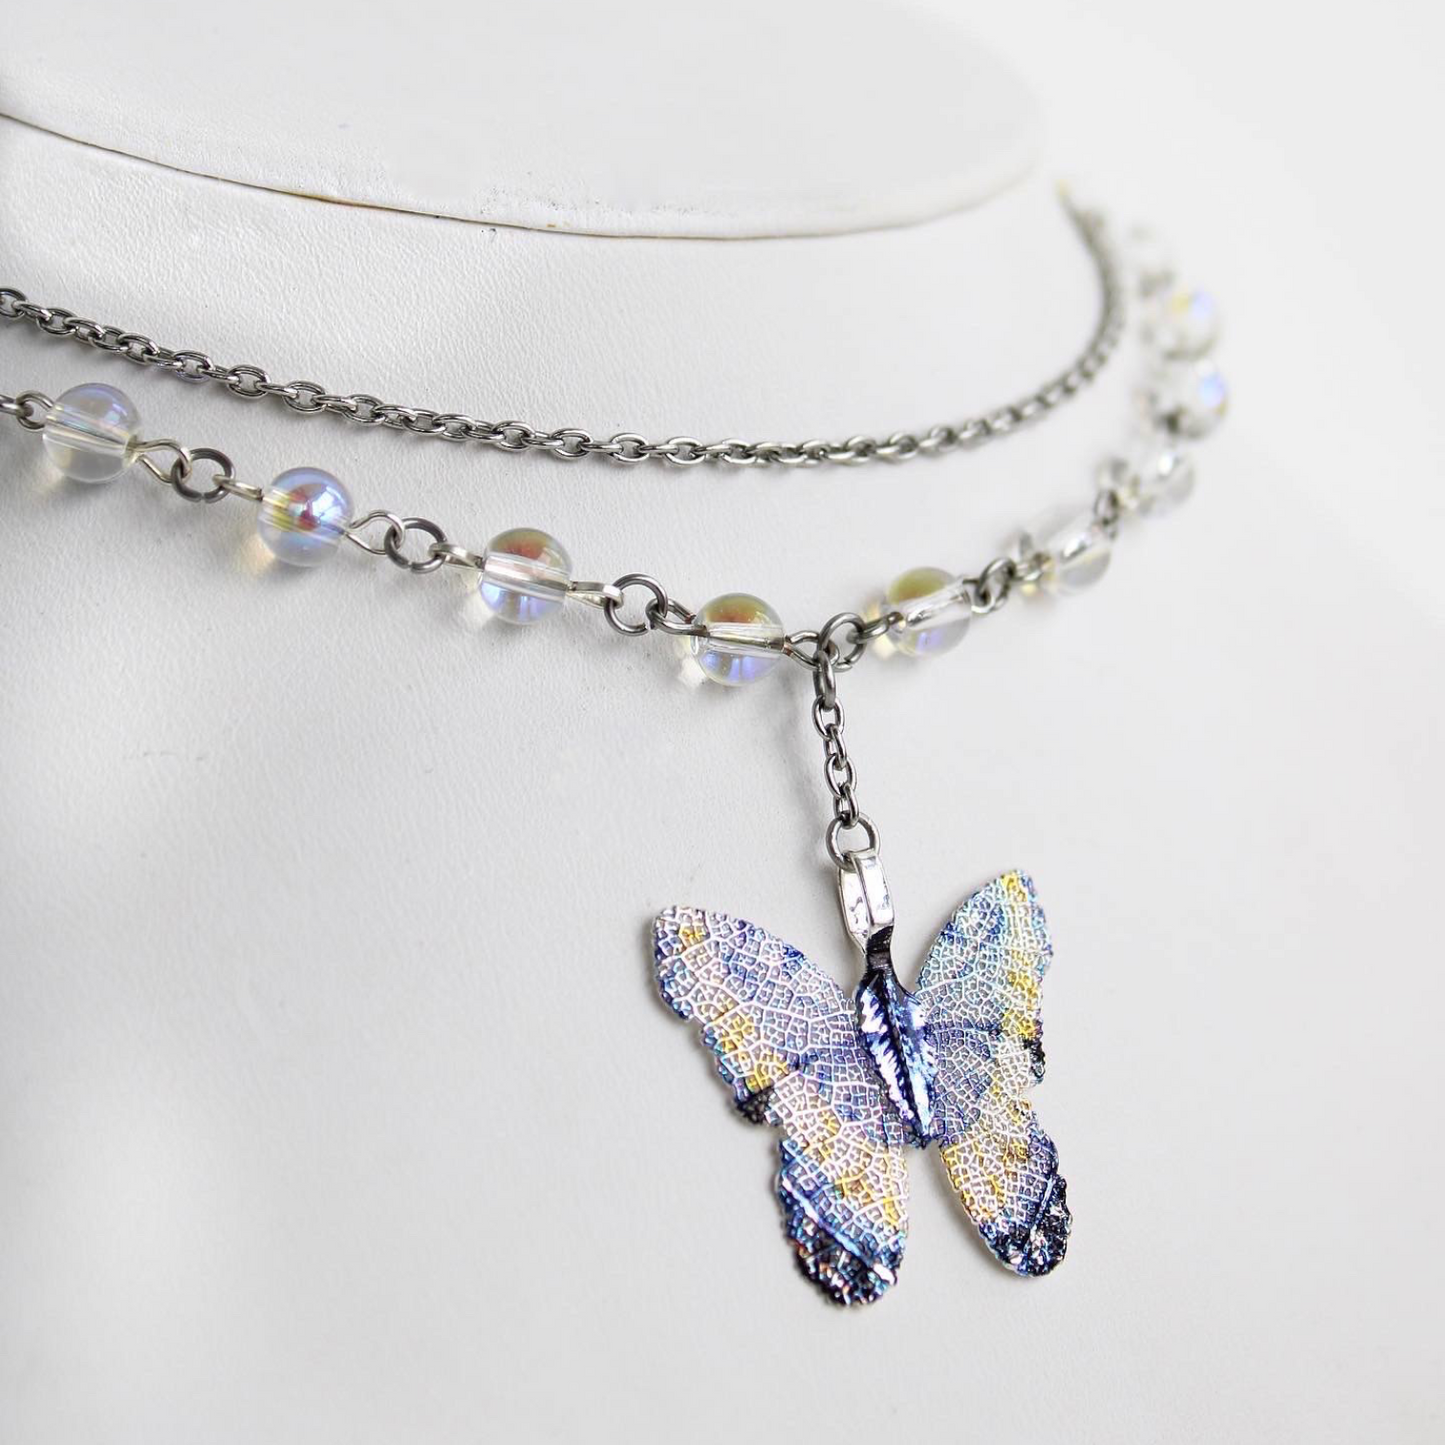 Blue Butterfly Necklace with Iridescent Beads